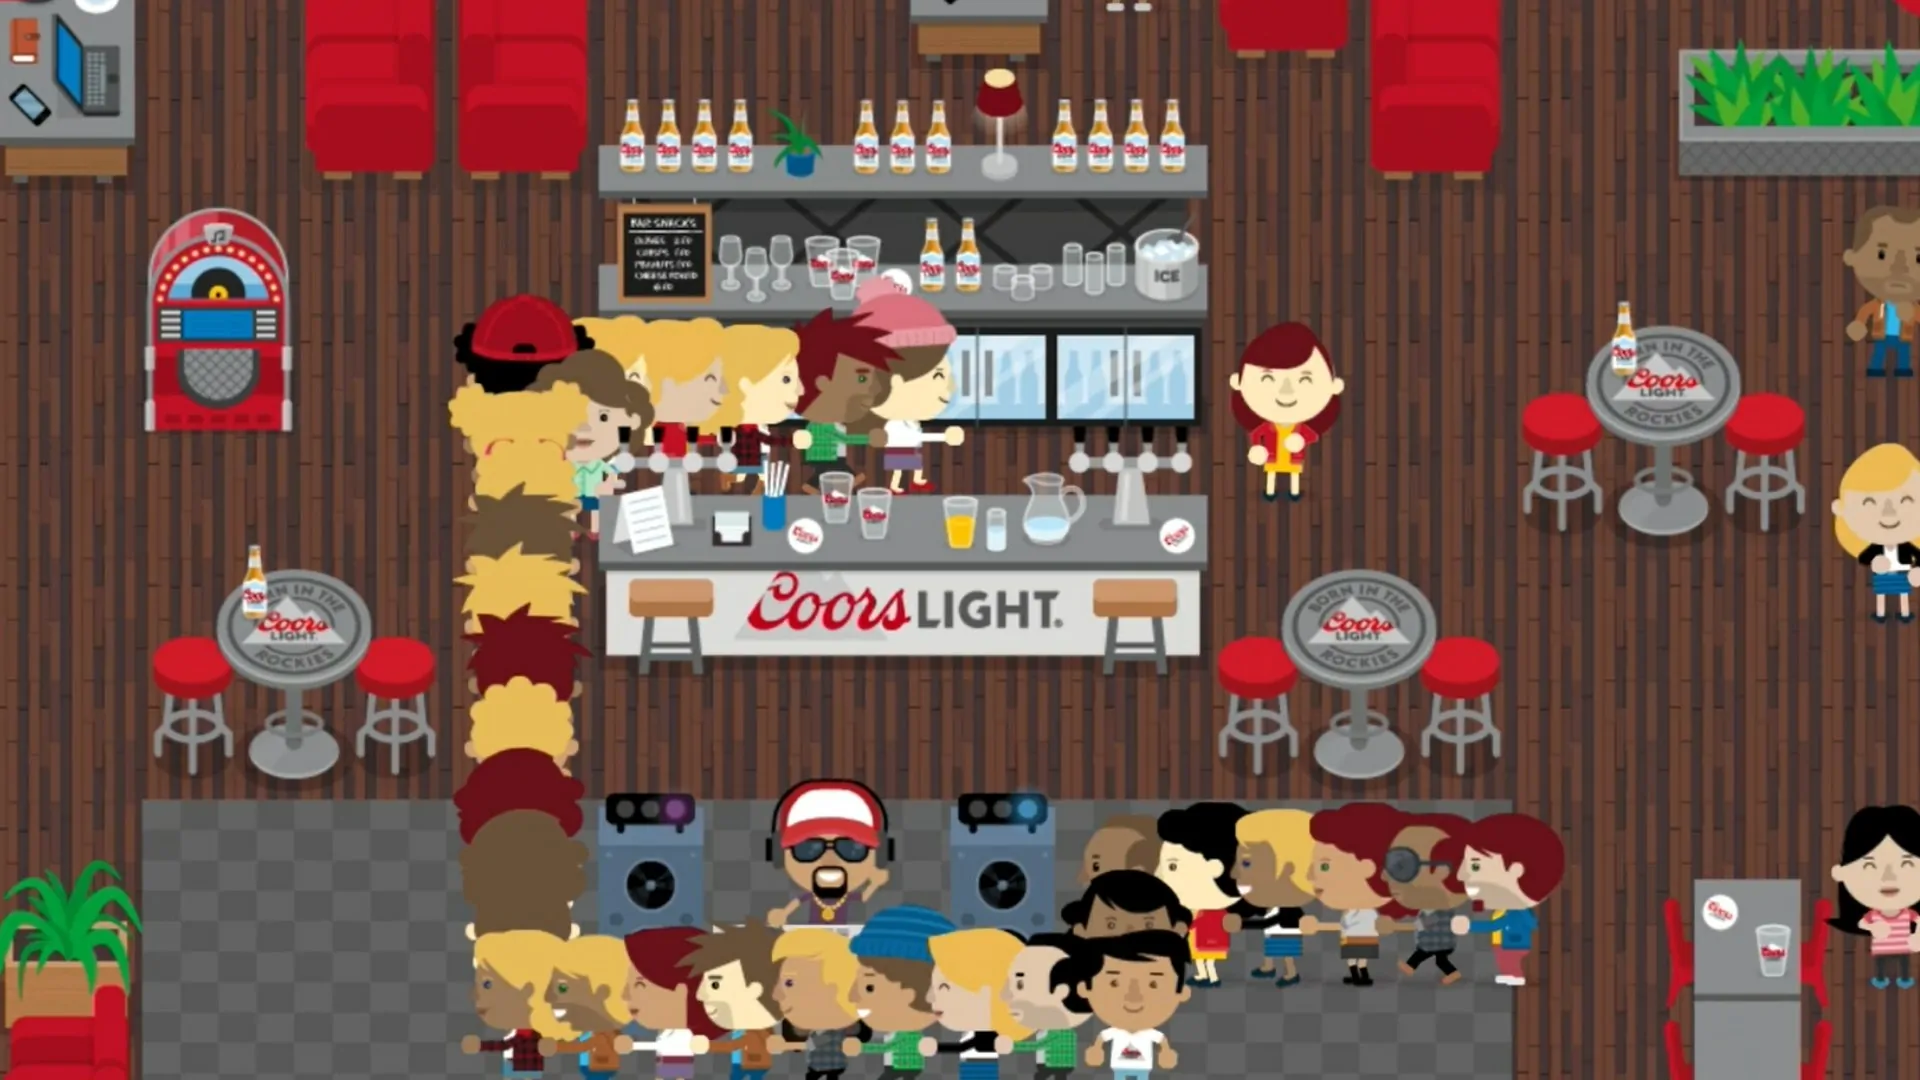 Coors Light Branded Game Food & Drink Industry